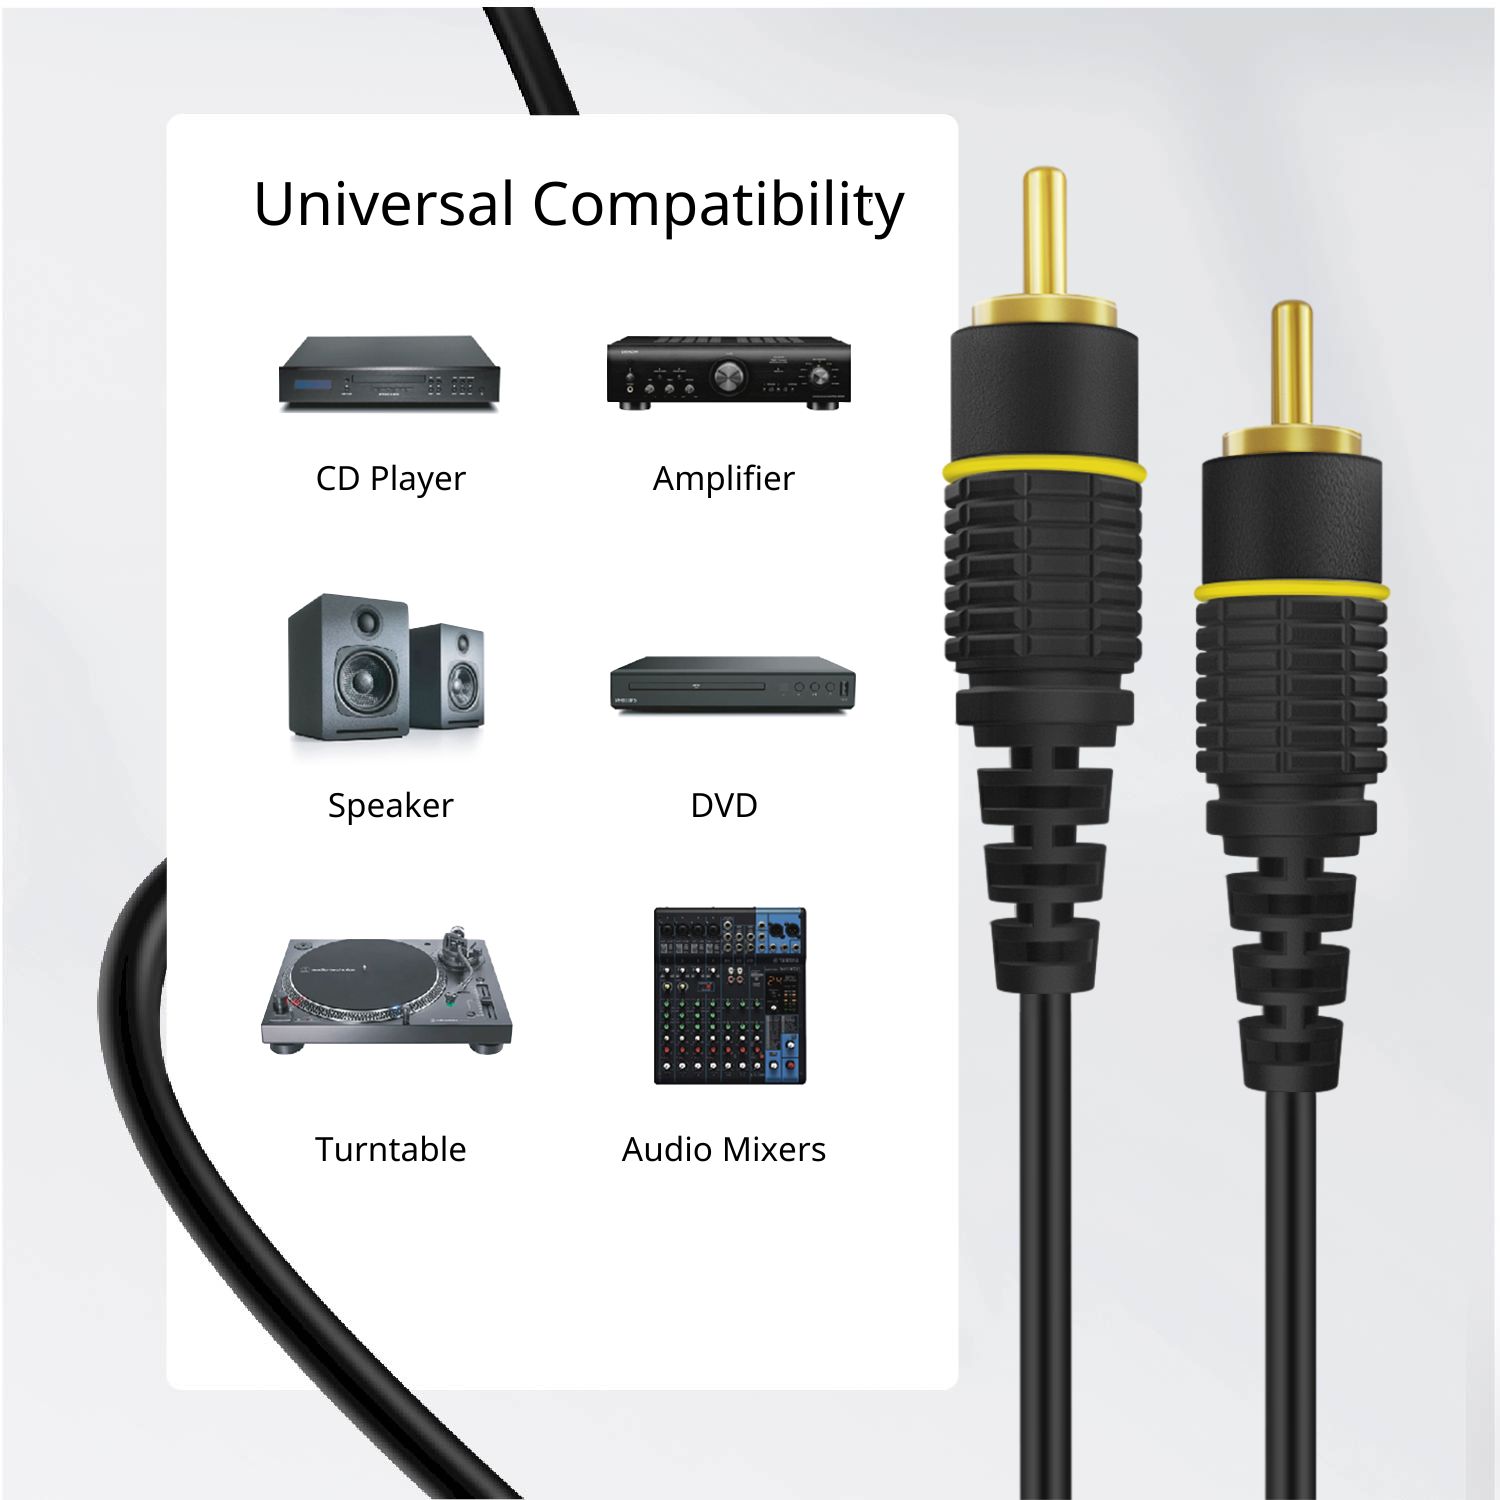 Subwoofer S/PDIF Audio Digital Coaxial RCA Composite Video Cable (15 Feet) - Gold Plated Dual Shielded RCA to RCA Male Connectors - Black - image 5 of 6